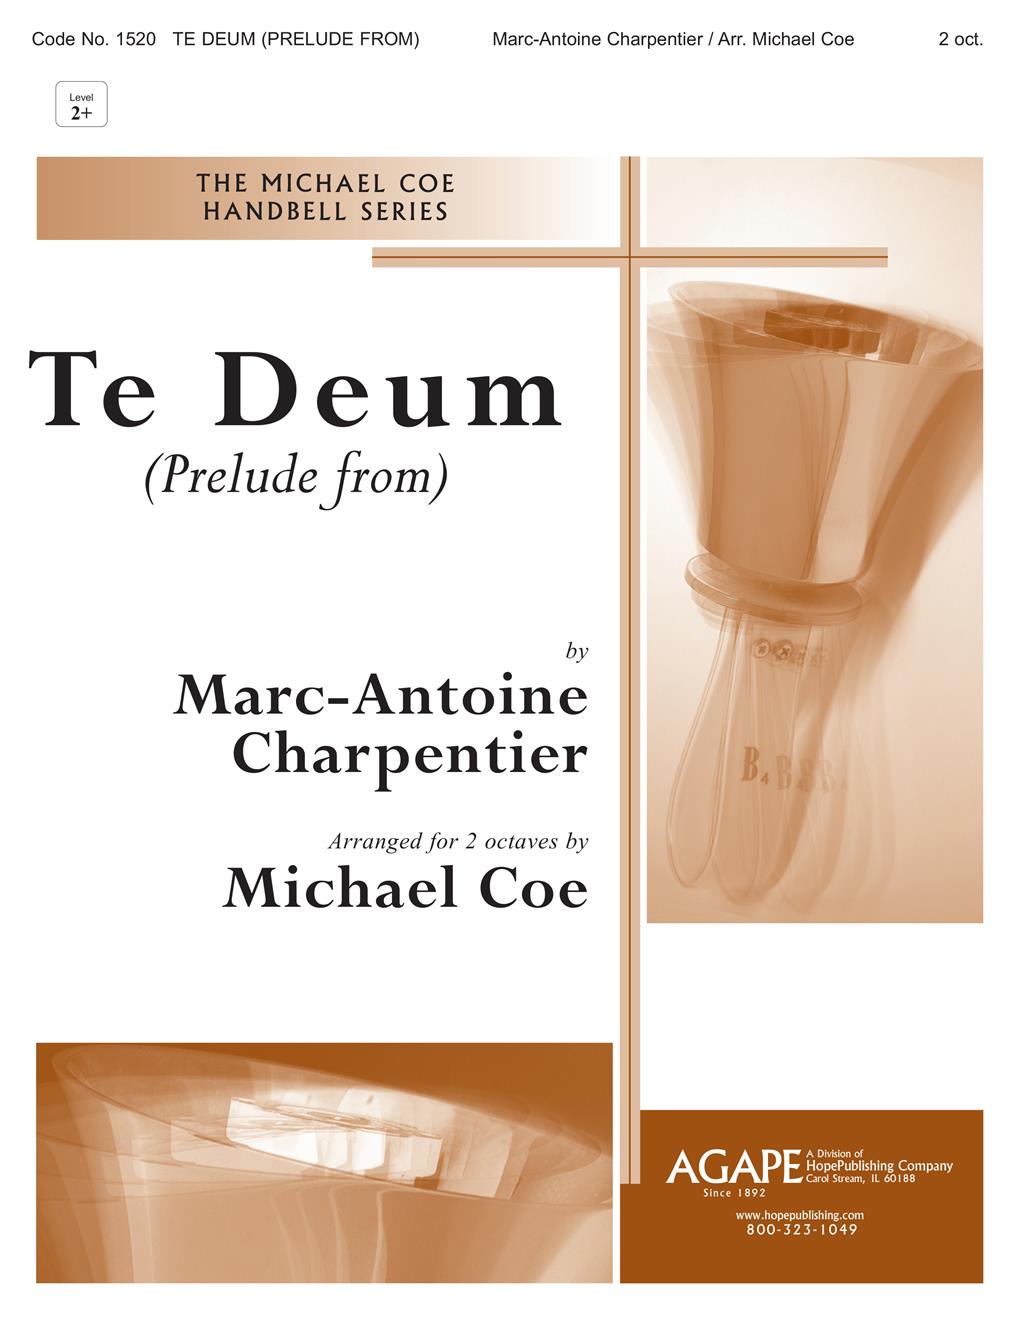 Prelude from "Te Deum" - 2 Oct. Cover Image